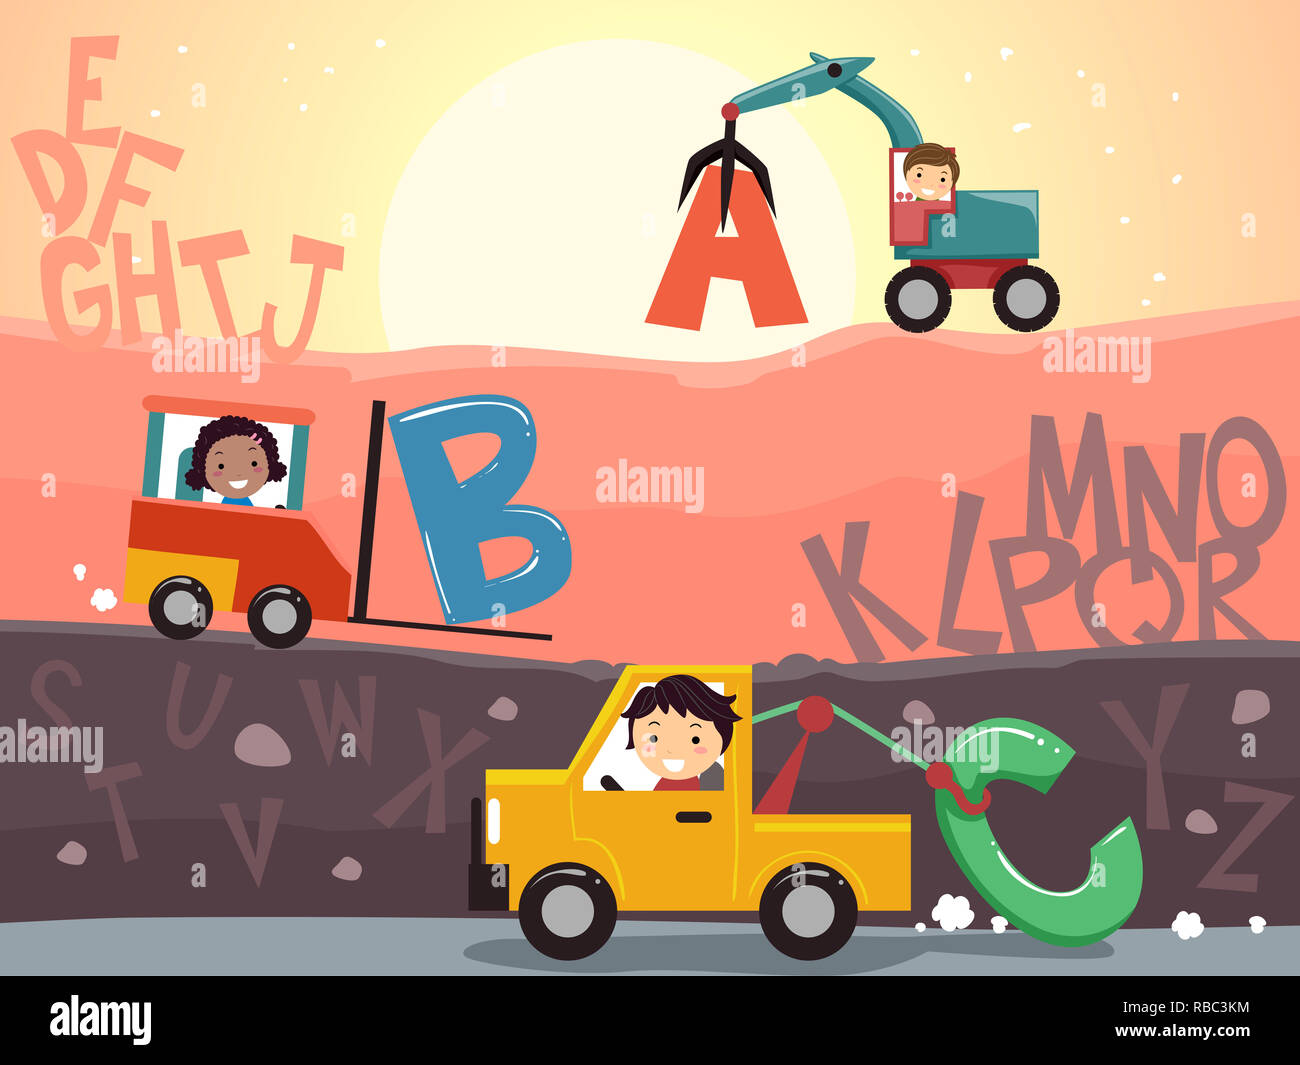 Illustration of Stickman Kids in the Junkyard with the Alphabet Stock Photo